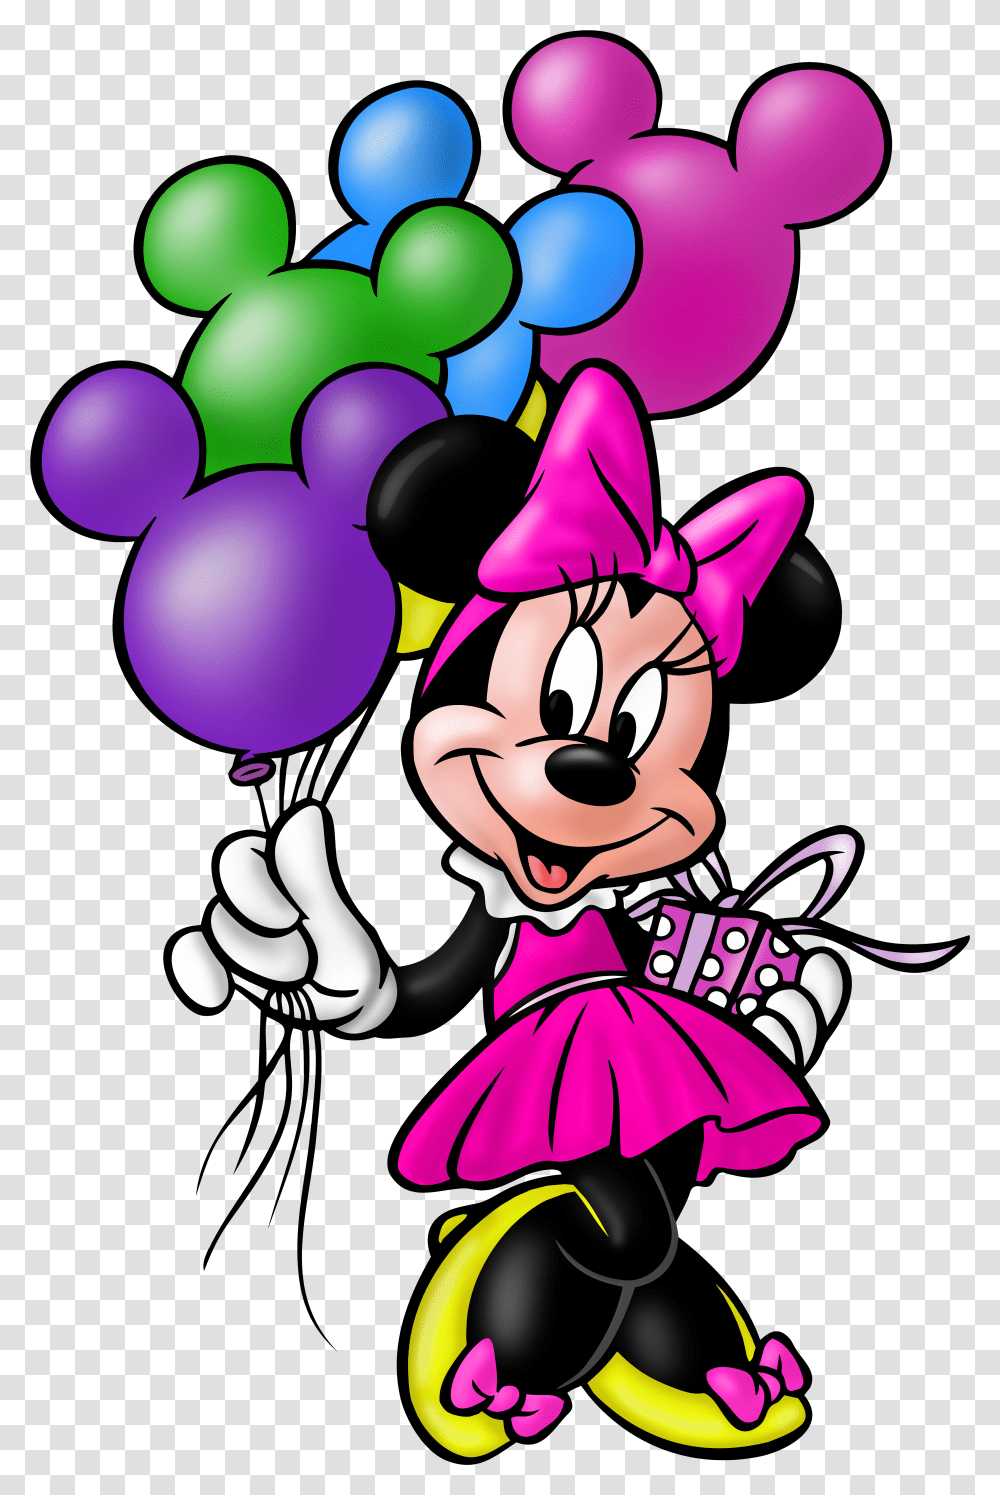 Minnie Mouse With Balloons Transparent Png